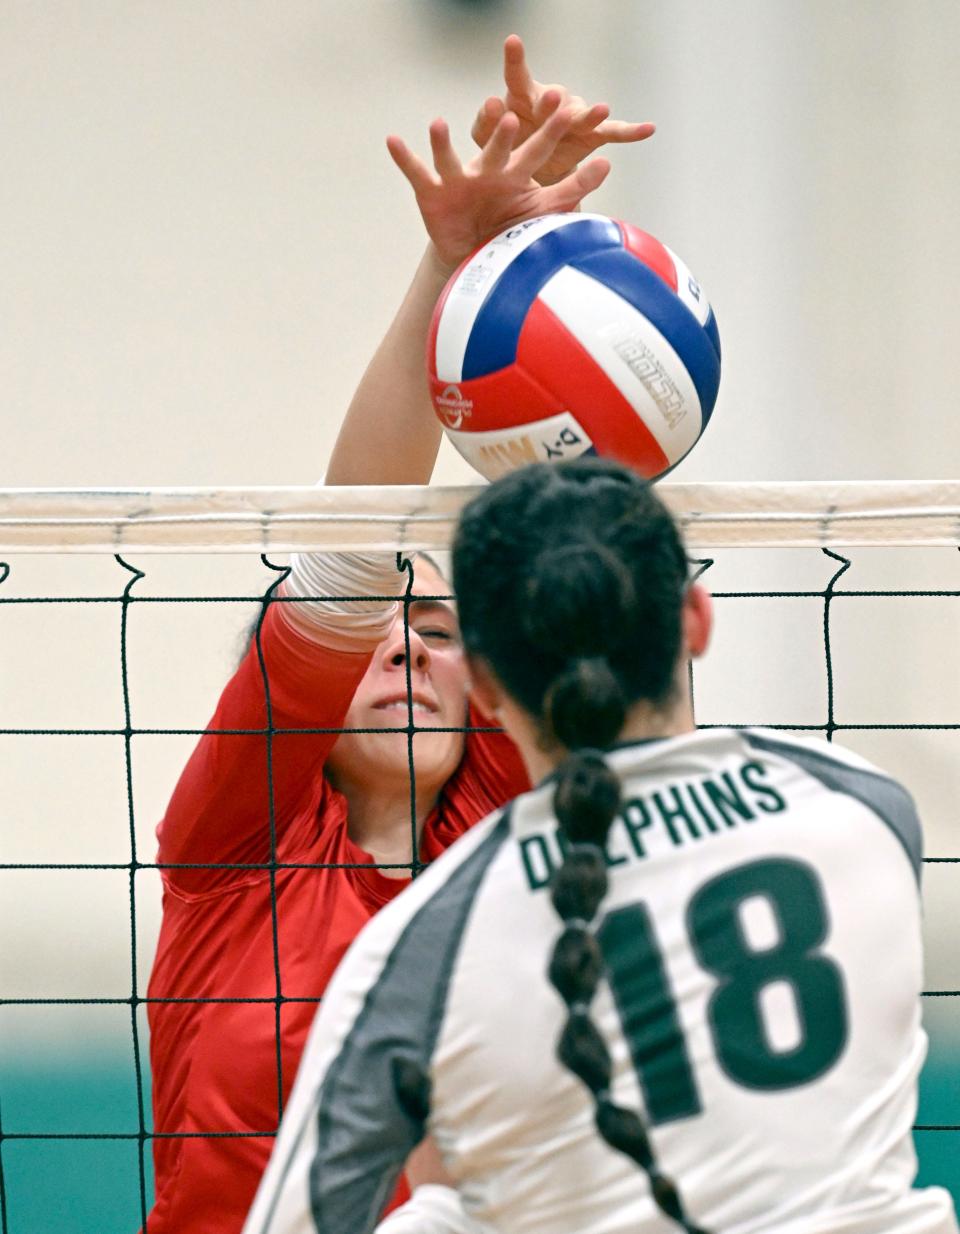 Dylan Andrews of Barnstable blocks the ball from Mariah Eaton of D-Y girls volleyball.